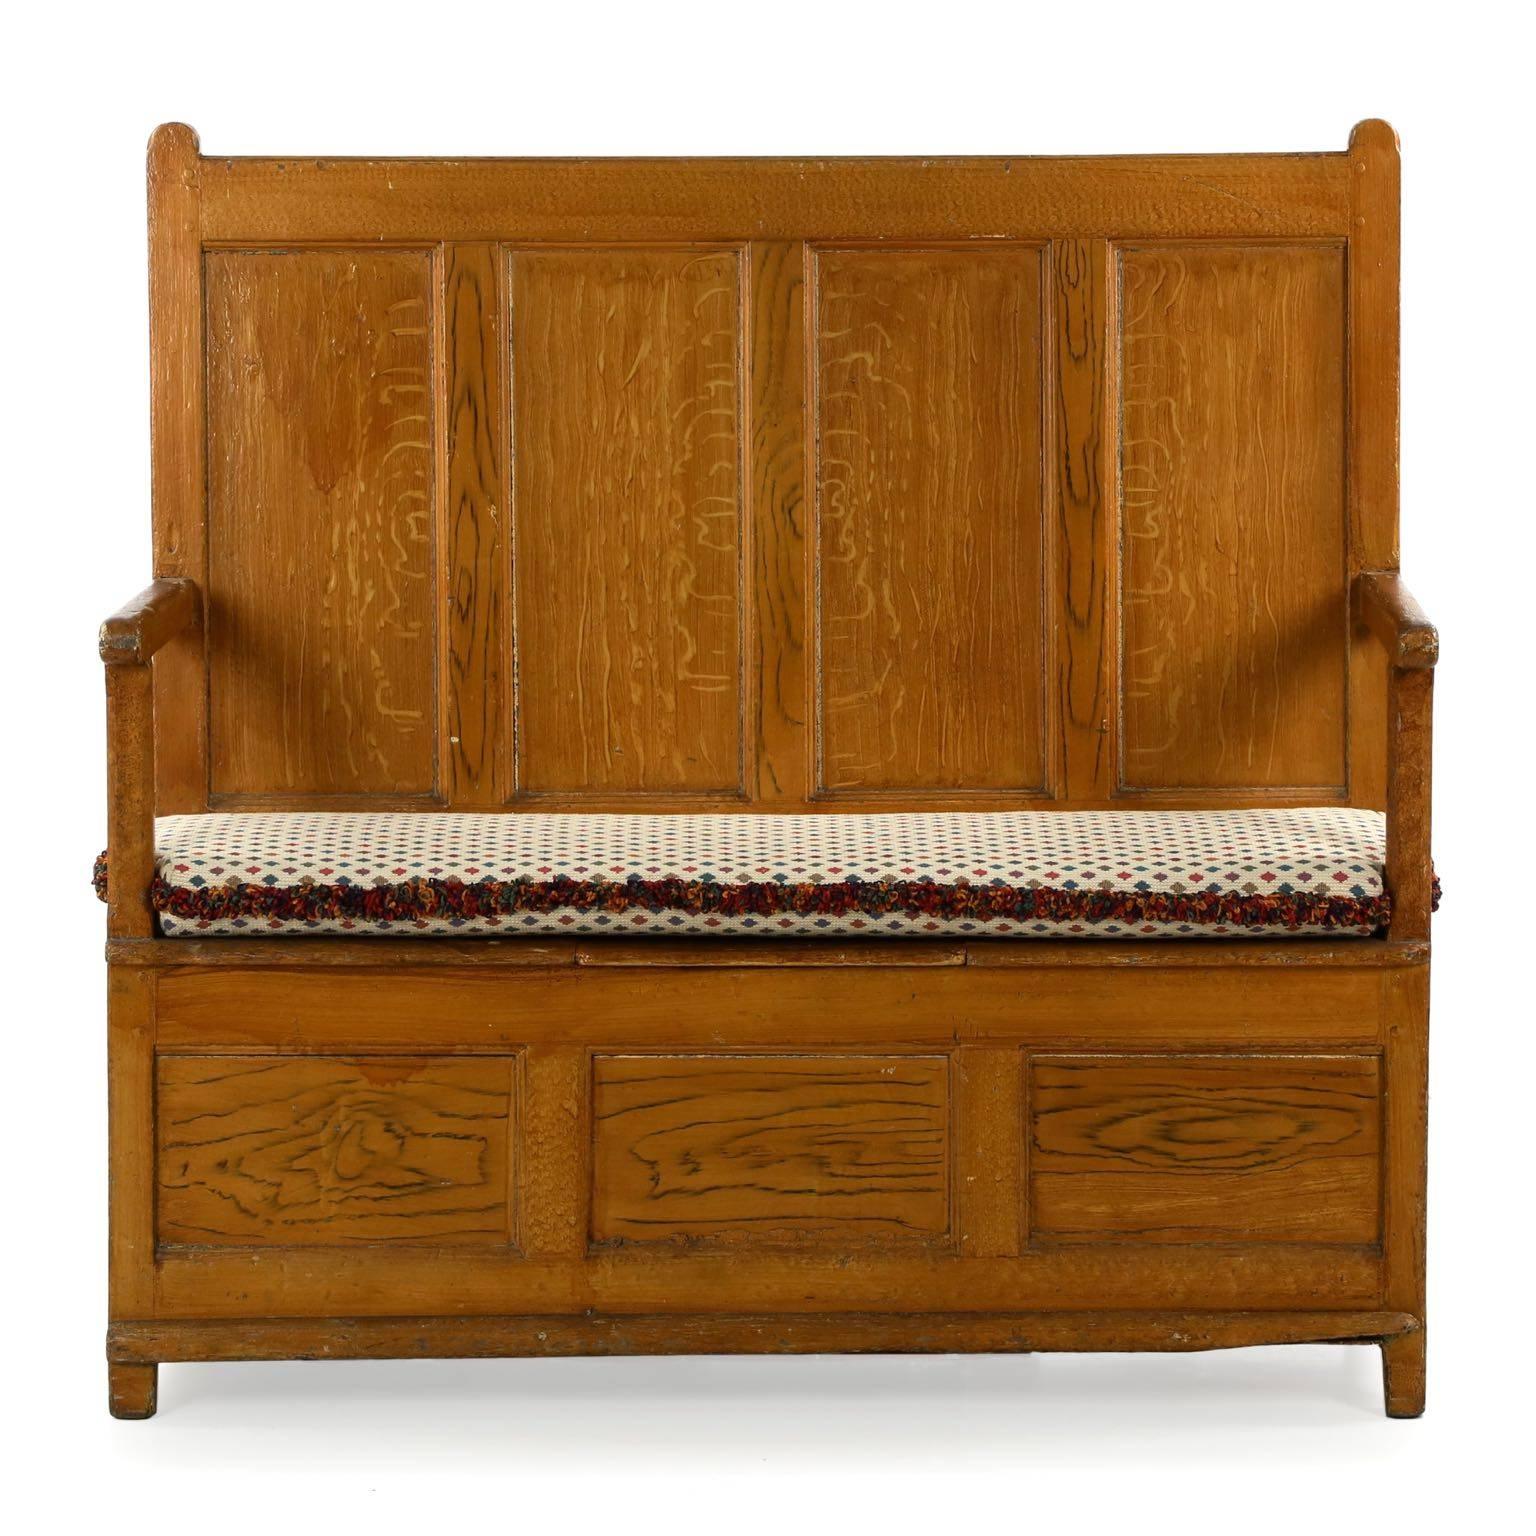 An orderly and precisely built piece, this bench was generally intended in the entryway or hallway of a country home, allowing one to rest to put on or remove shoes before proceeding. The cushion covers a lid that opens to provide access to a large